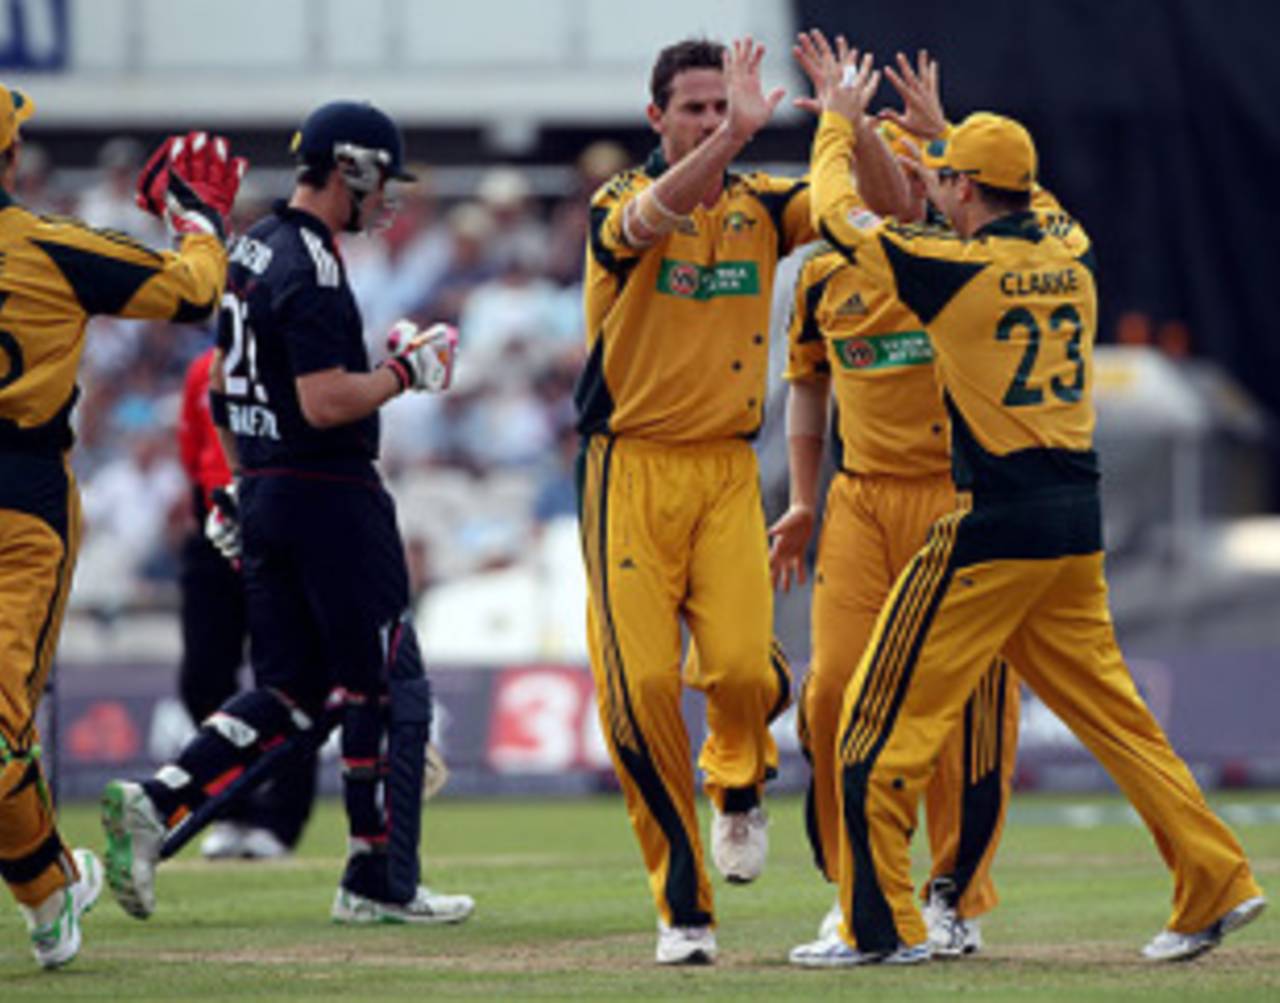 Shaun Tait struck in his first over to remove Craig Kieswetter, England v Australia, 3rd ODI, Old Trafford, June 27, 2010